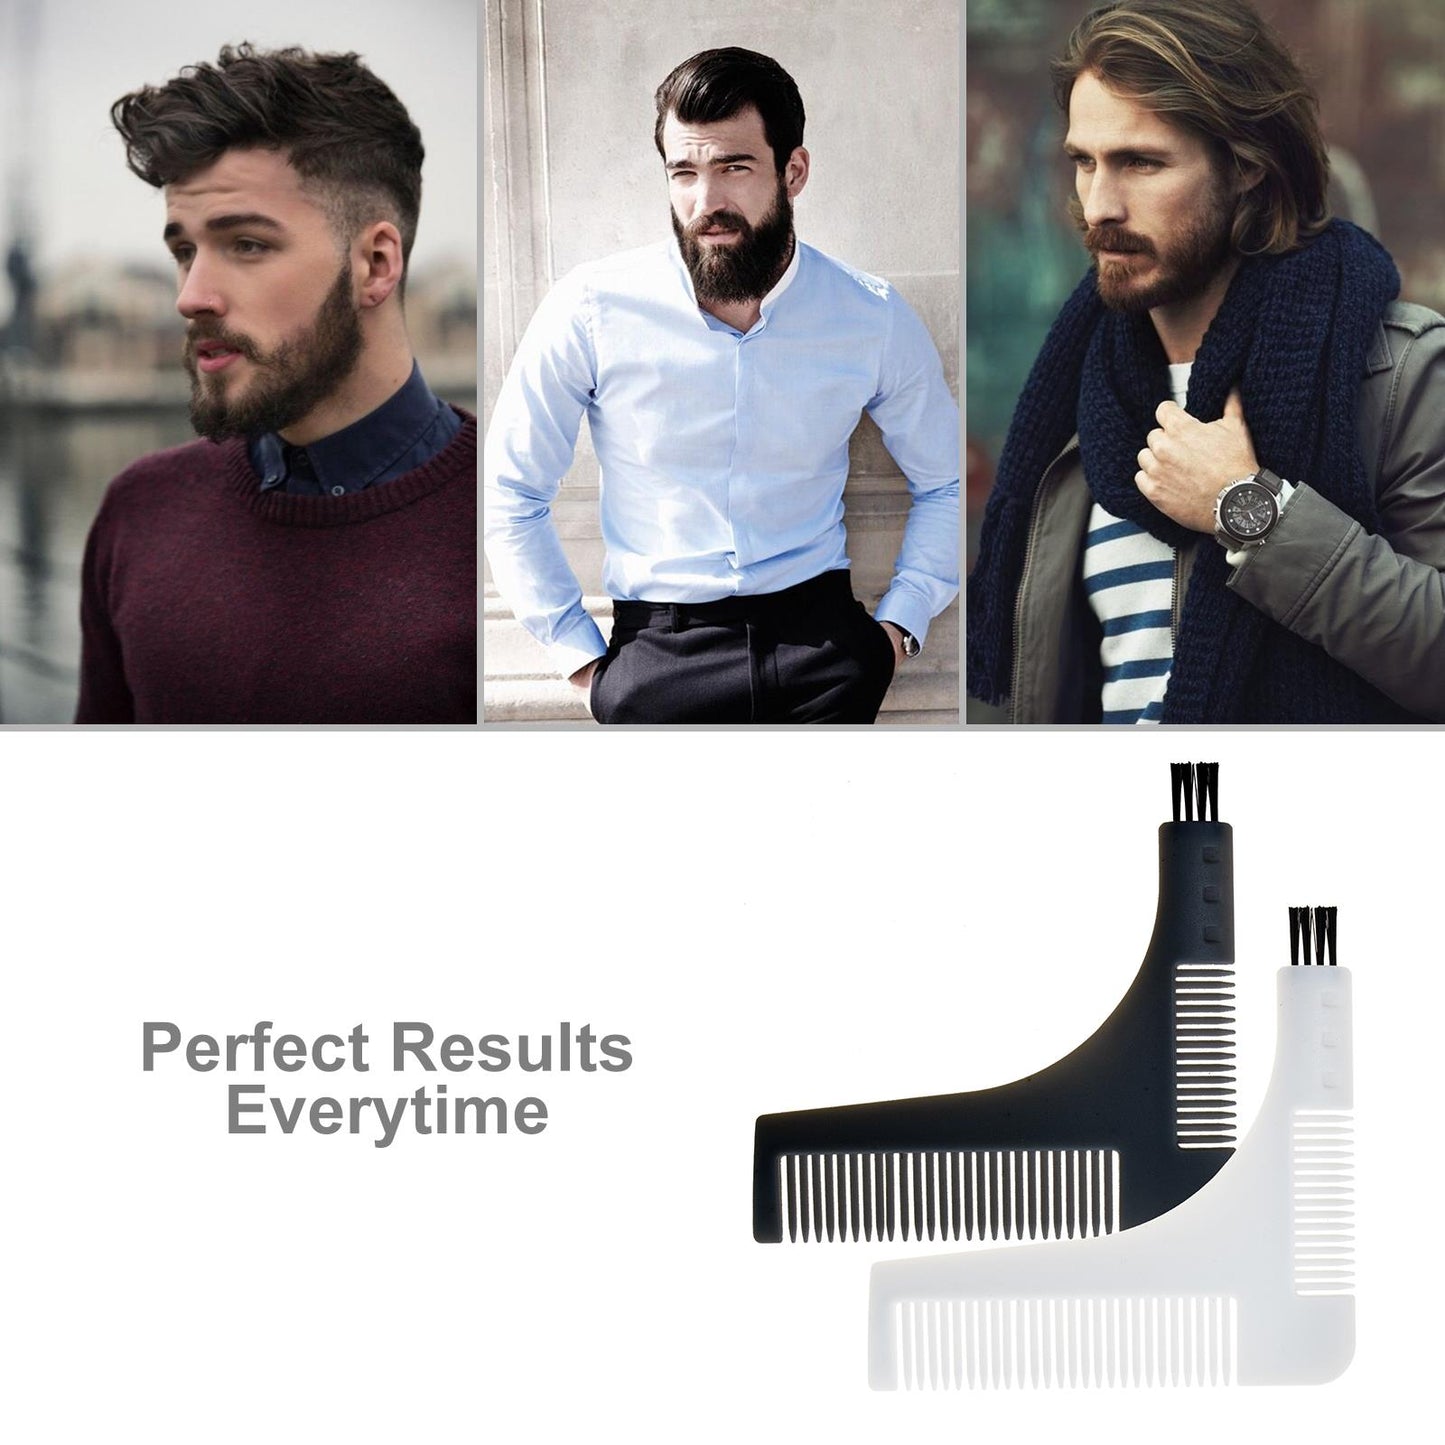 Beard Grooming Template for Symmetrical Styling